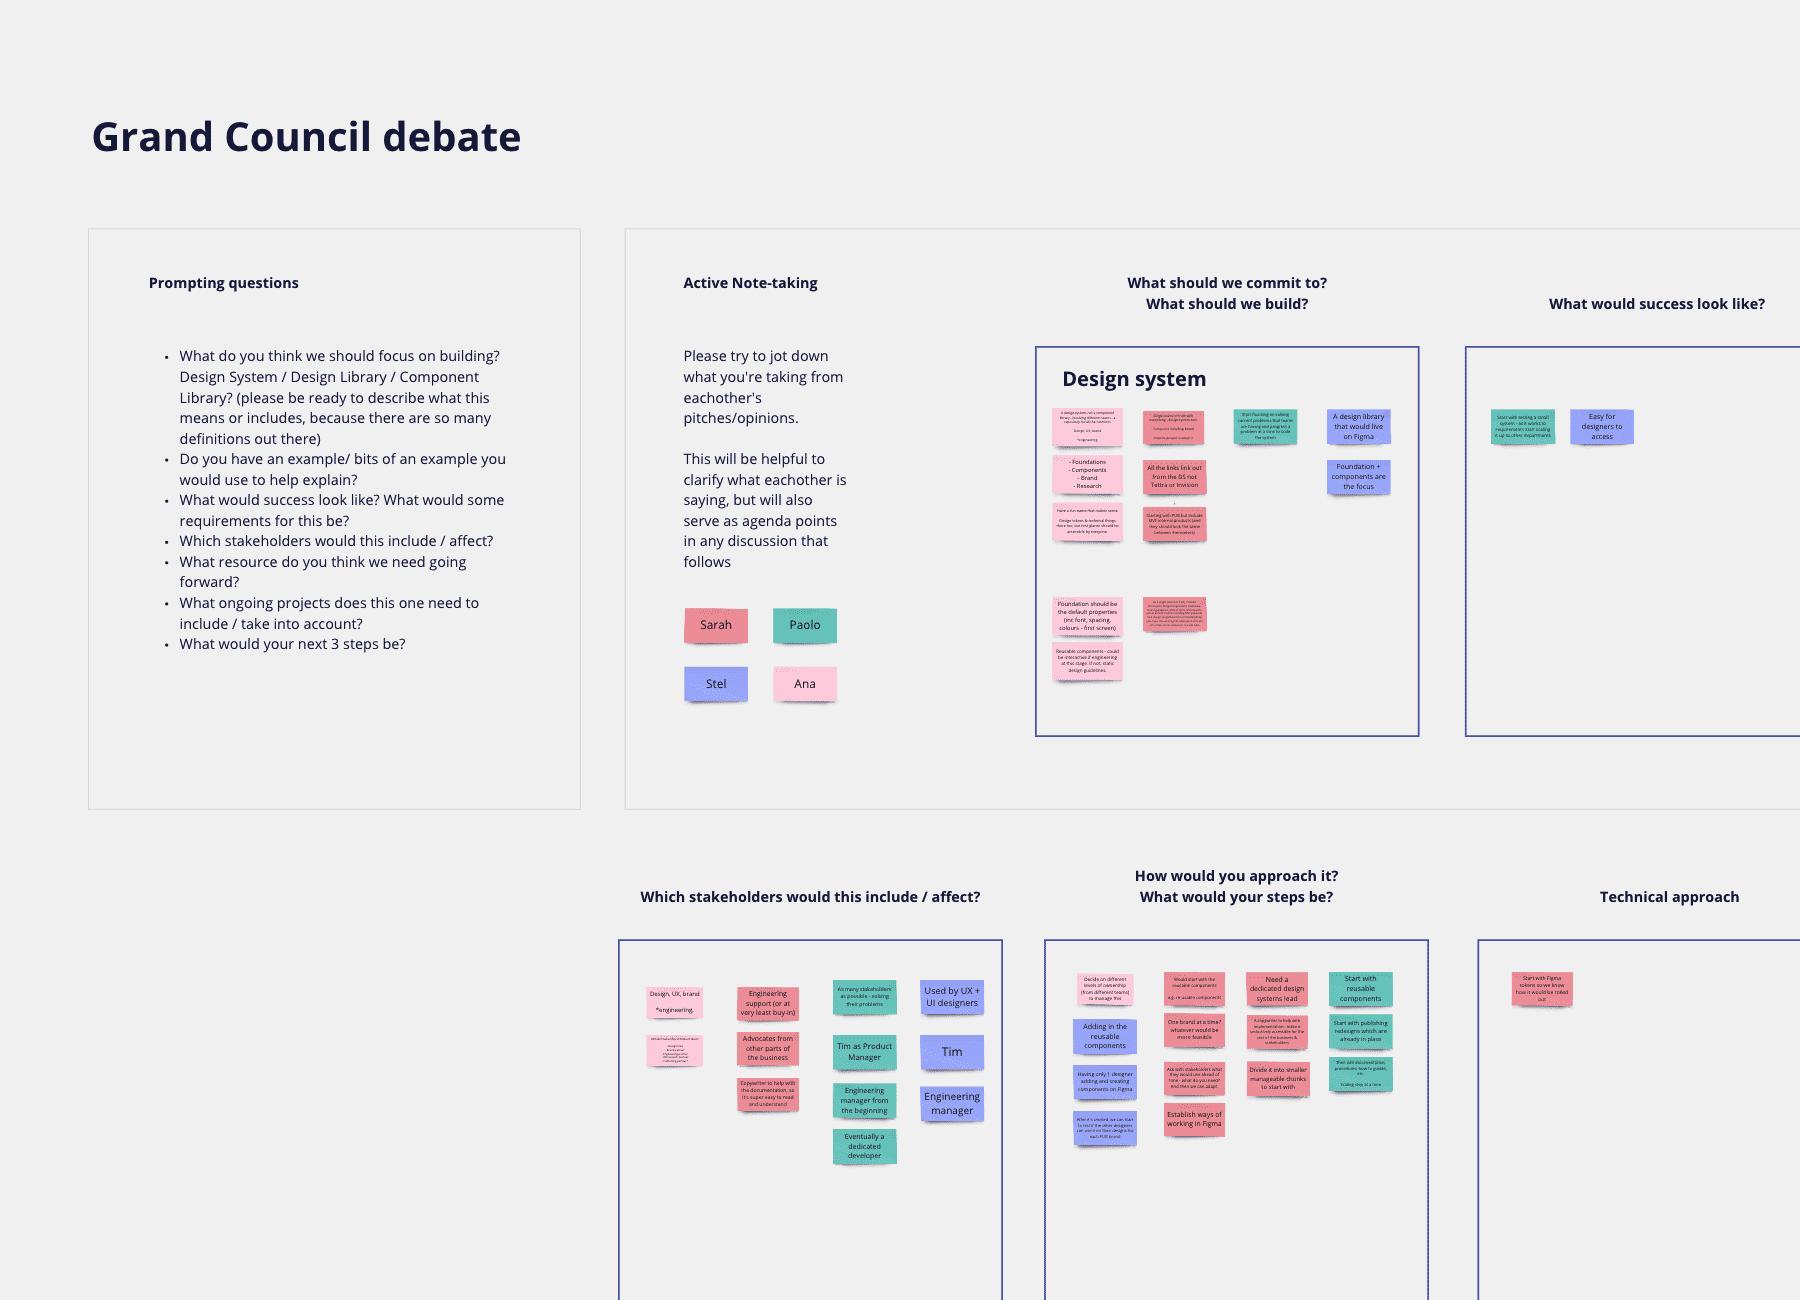 Design System strategy